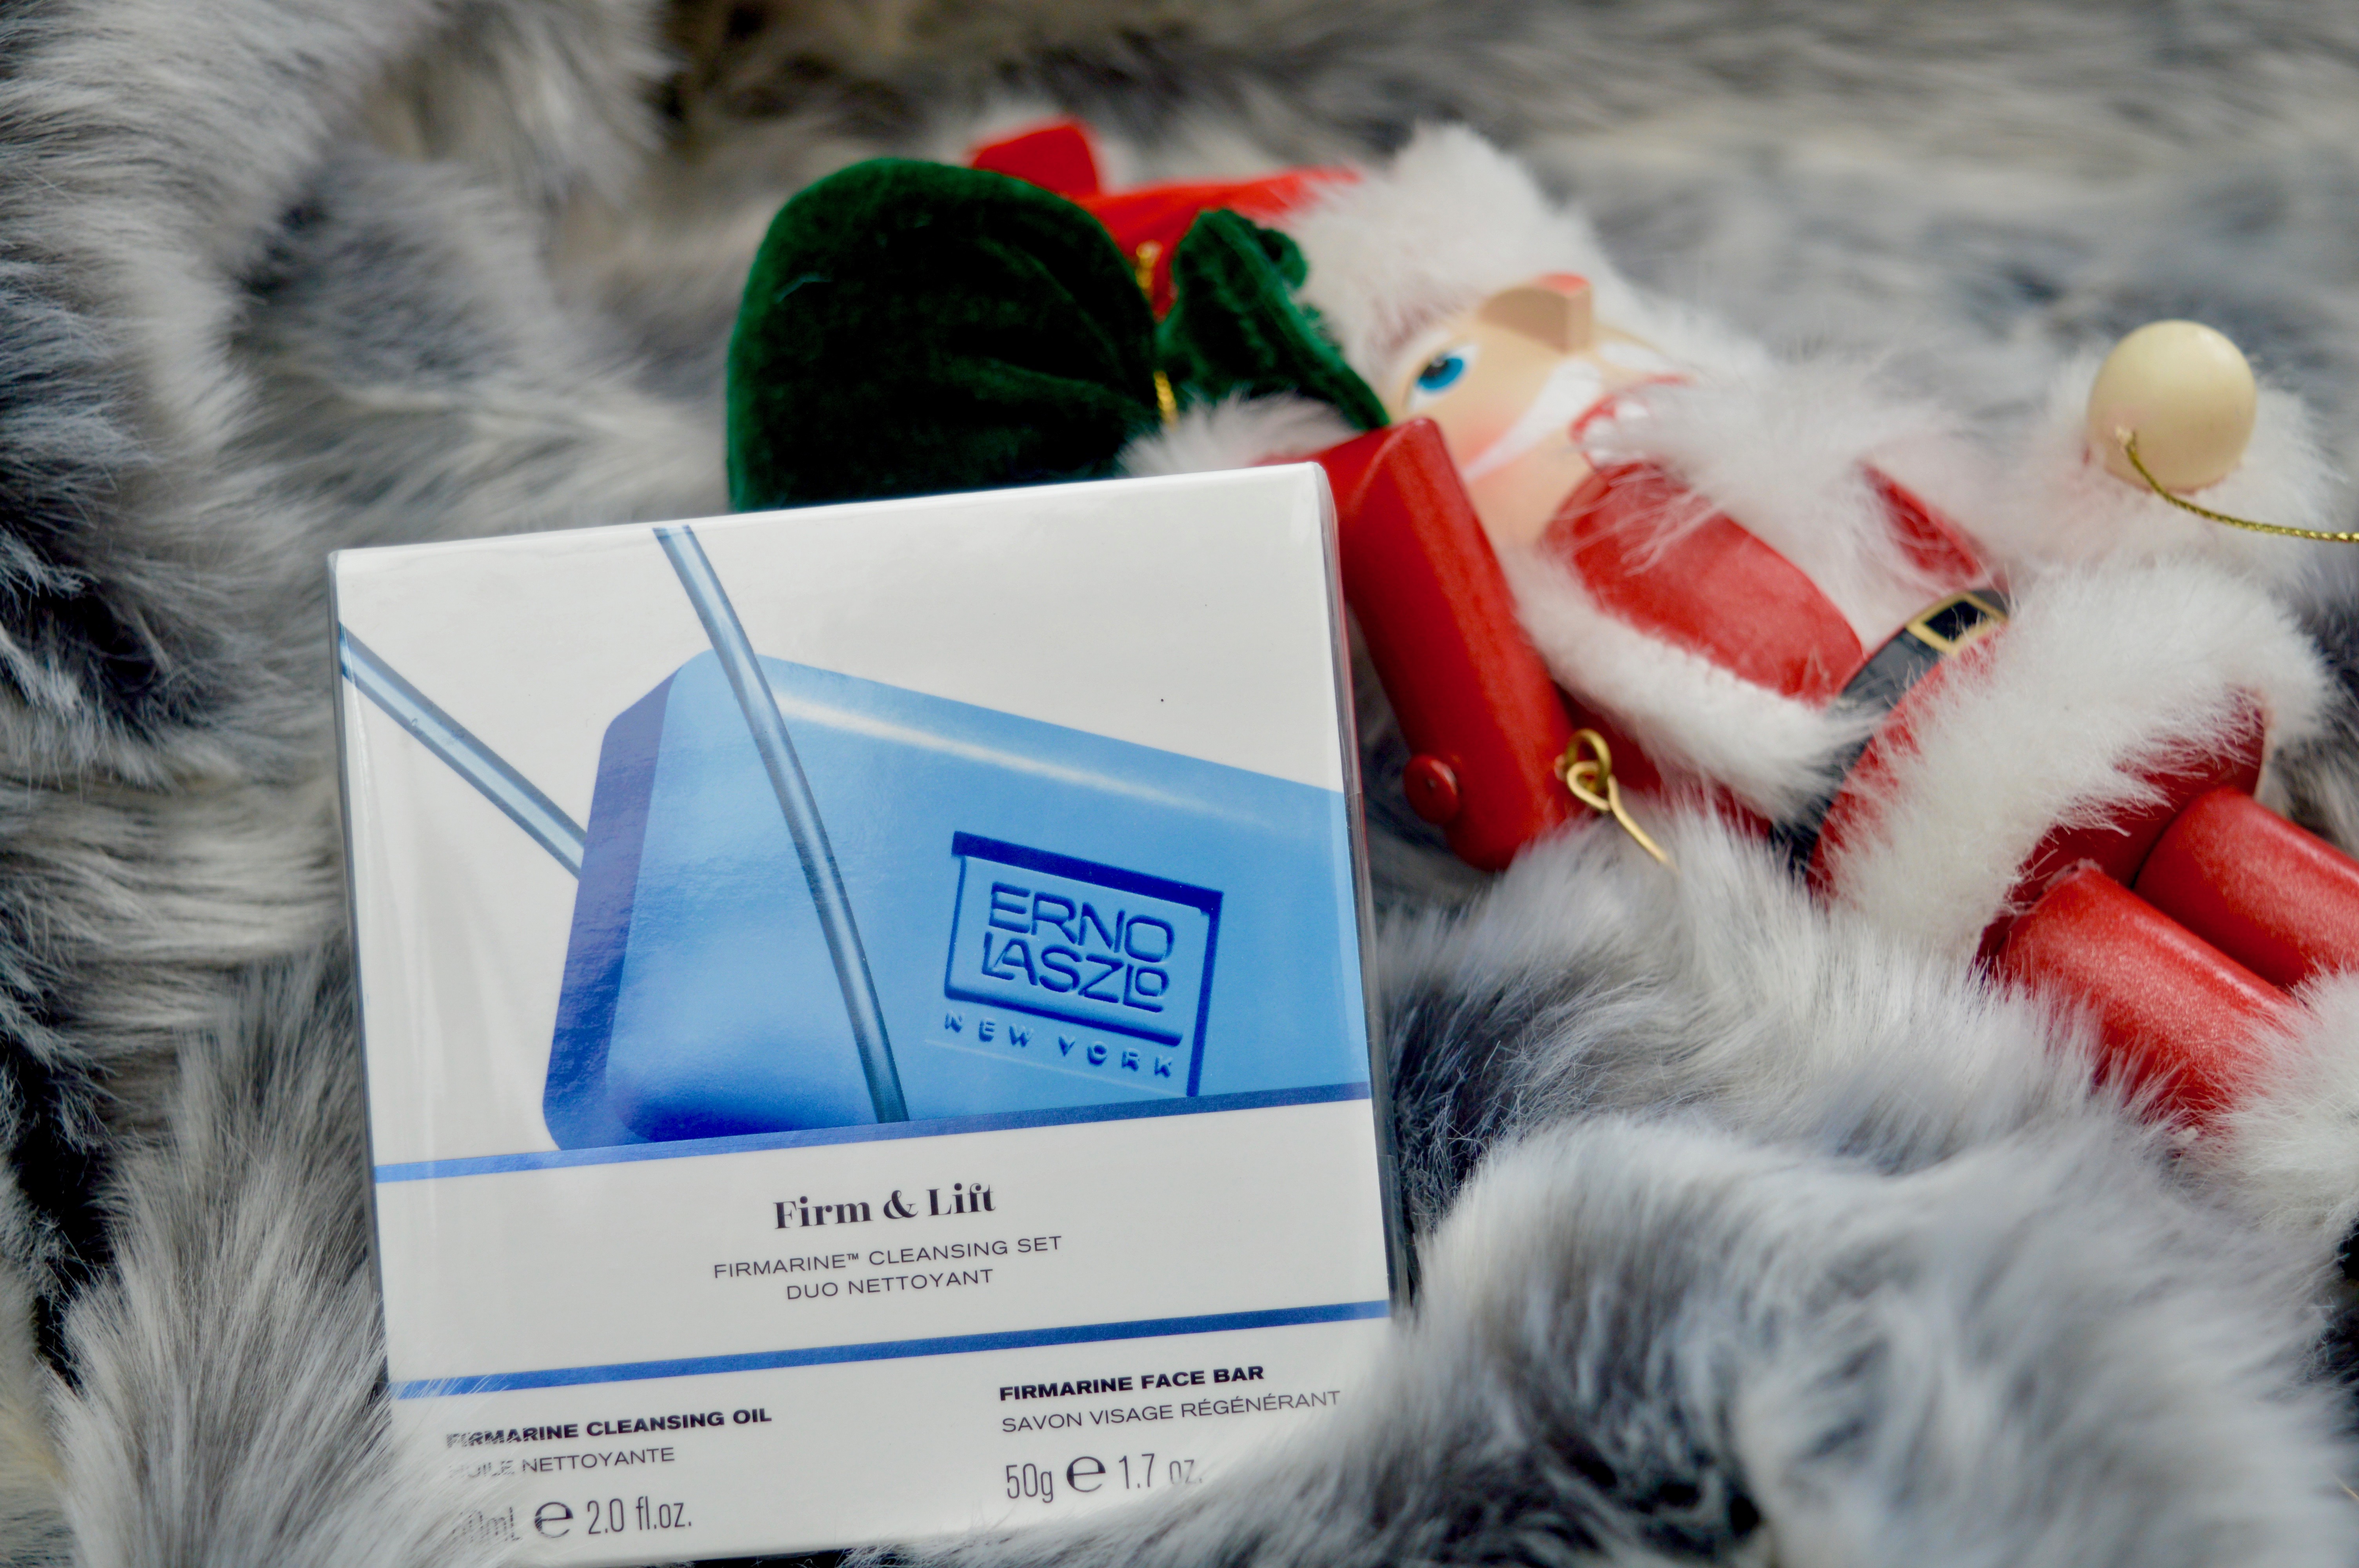 Firmarine Cleansing Set | Erno Laszlo New York | Beauty Regime | Christmas Gift Guide - What to buy your Grandma | Elle Blonde Luxury Lifestyle Destination Blog